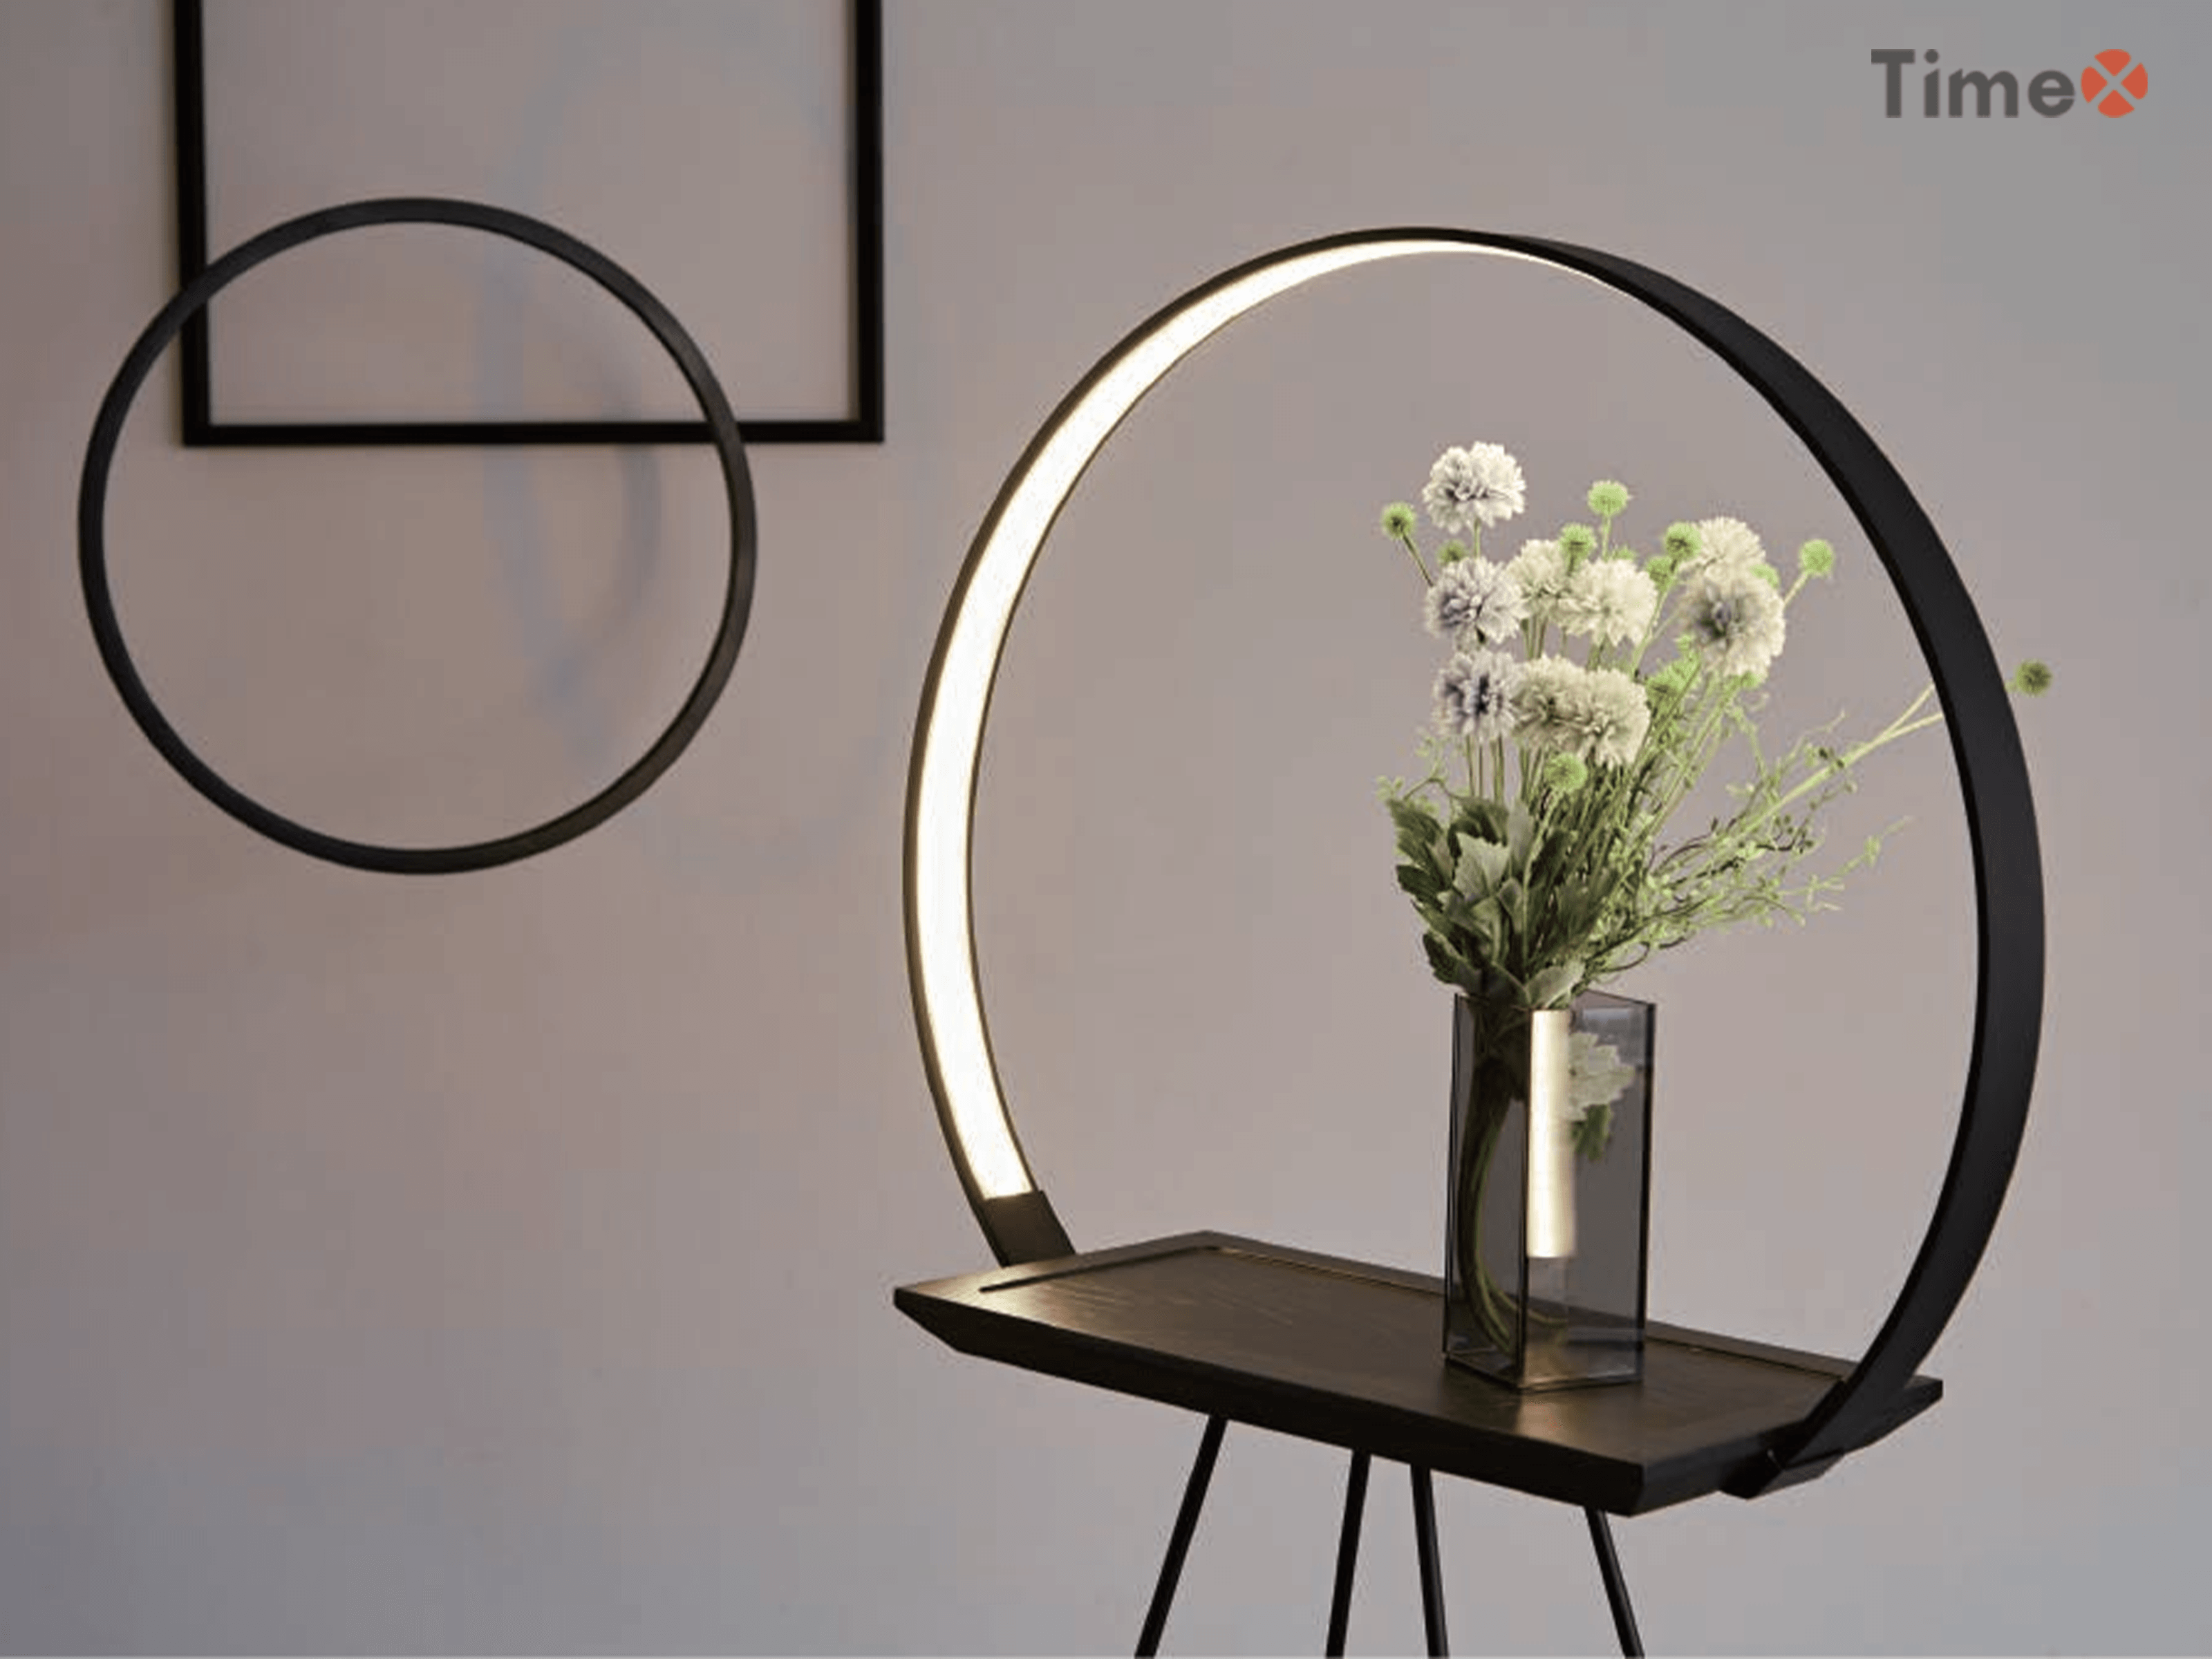 Indoor metal lamps that help plant growth